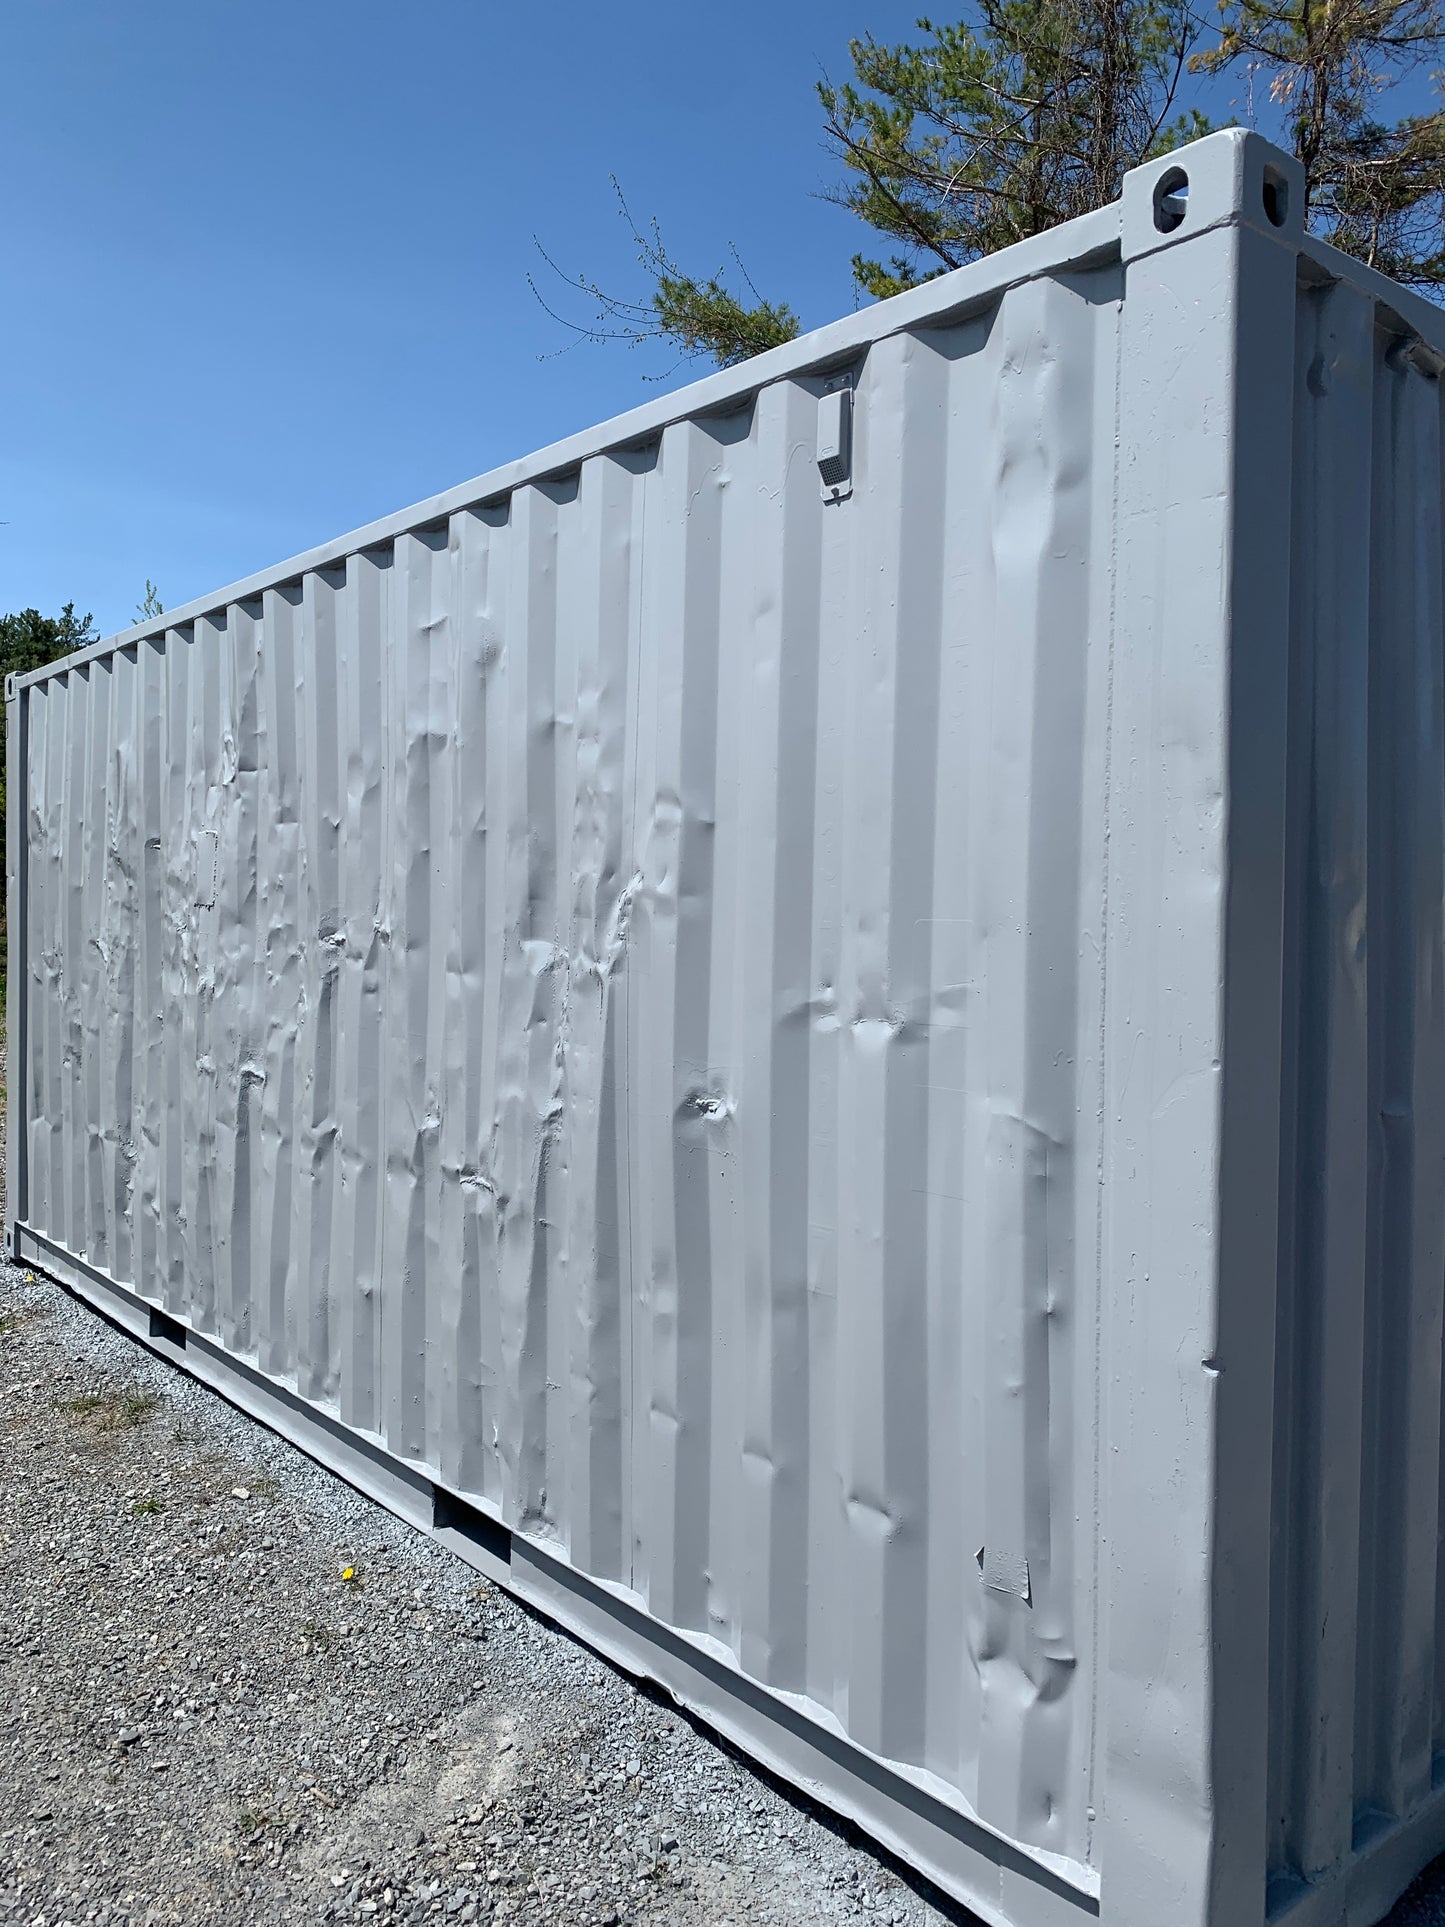 Used 20-Foot Shipping Container Painted Grey